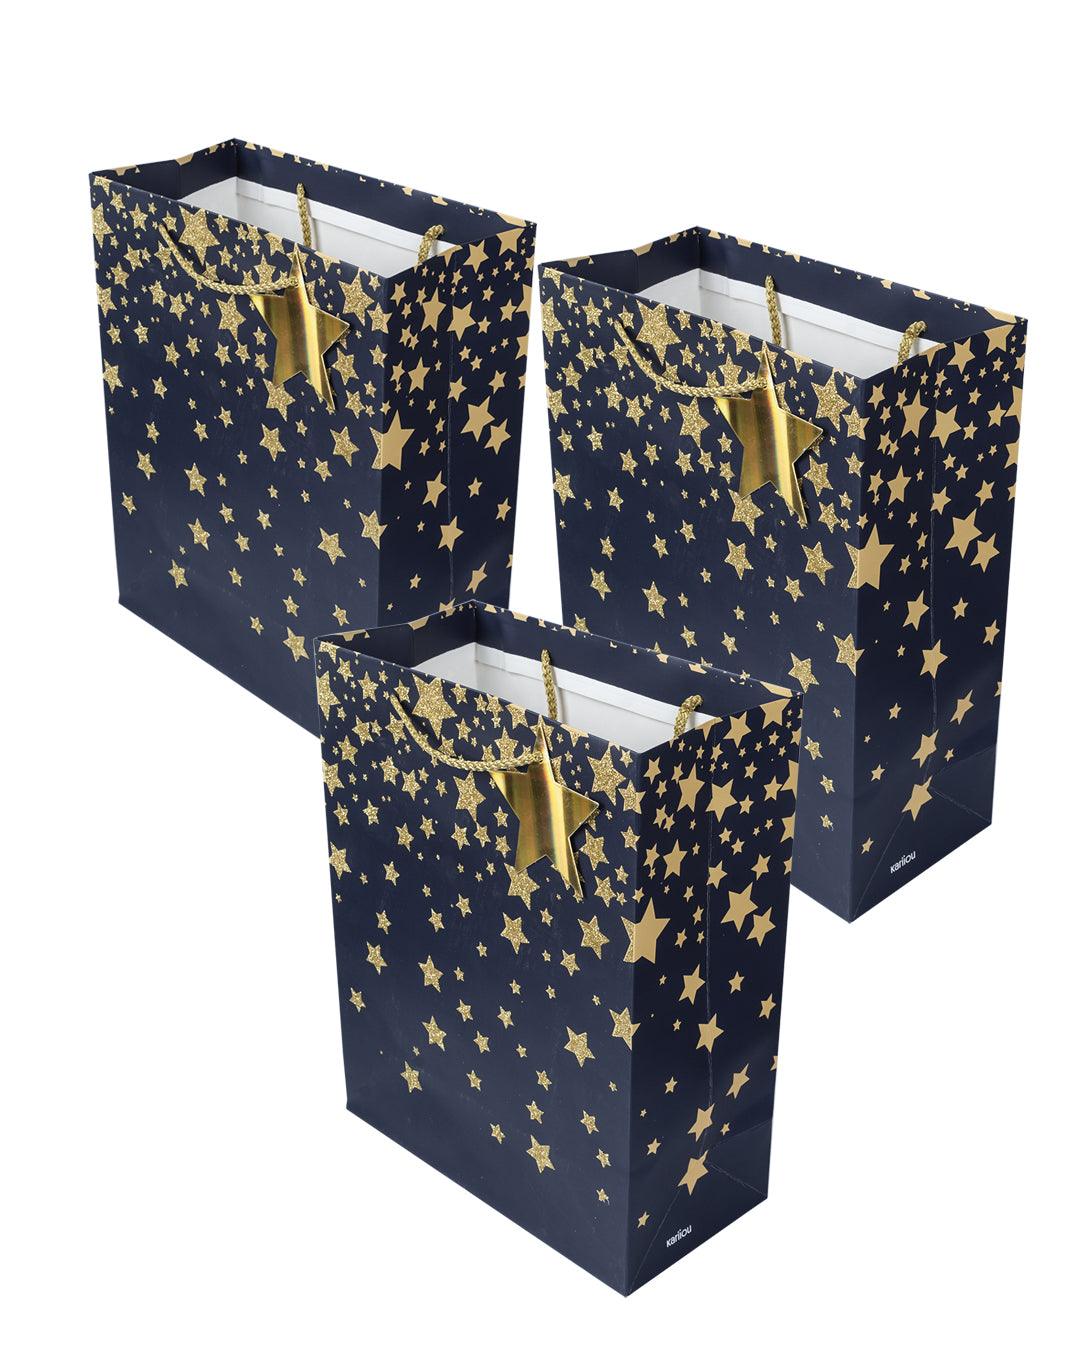 Starry Gift Bag, Small, Navy Blue, Paper, Set of 3 - MARKET 99